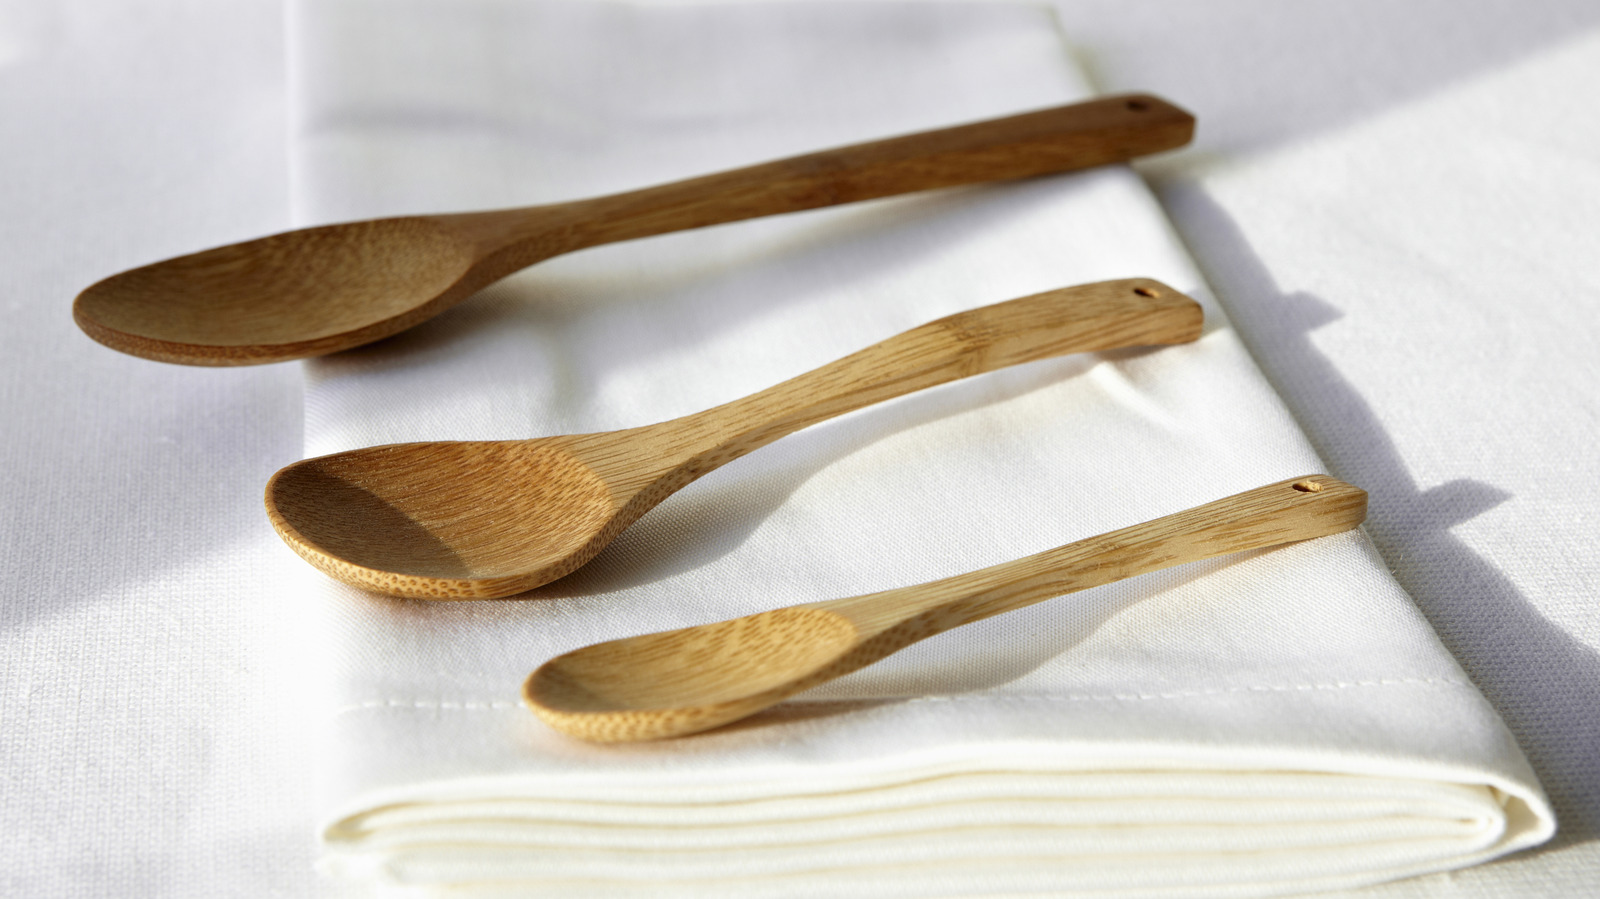 https://www.mashed.com/img/gallery/the-best-wooden-spoons/l-intro-1675626660.jpg